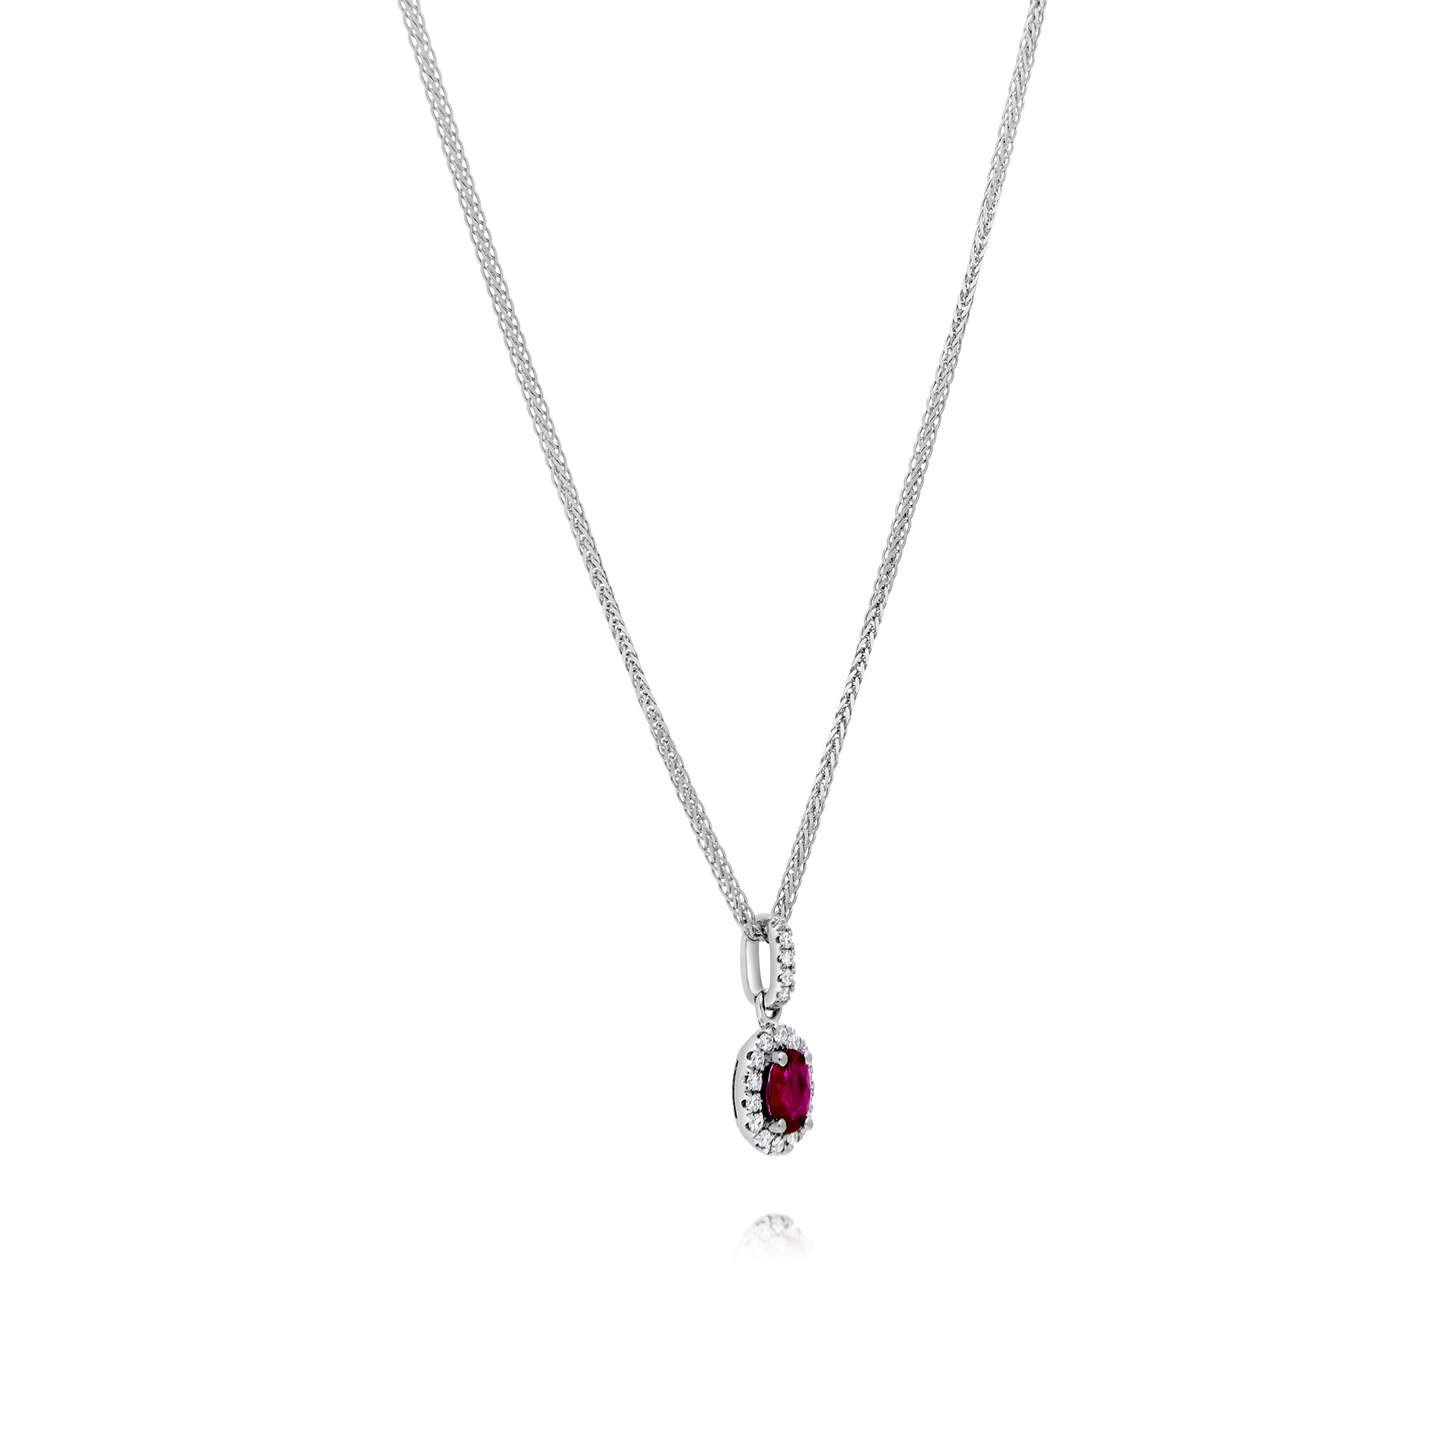 9ct White Gold Ruby and Diamond Pendant with Chain